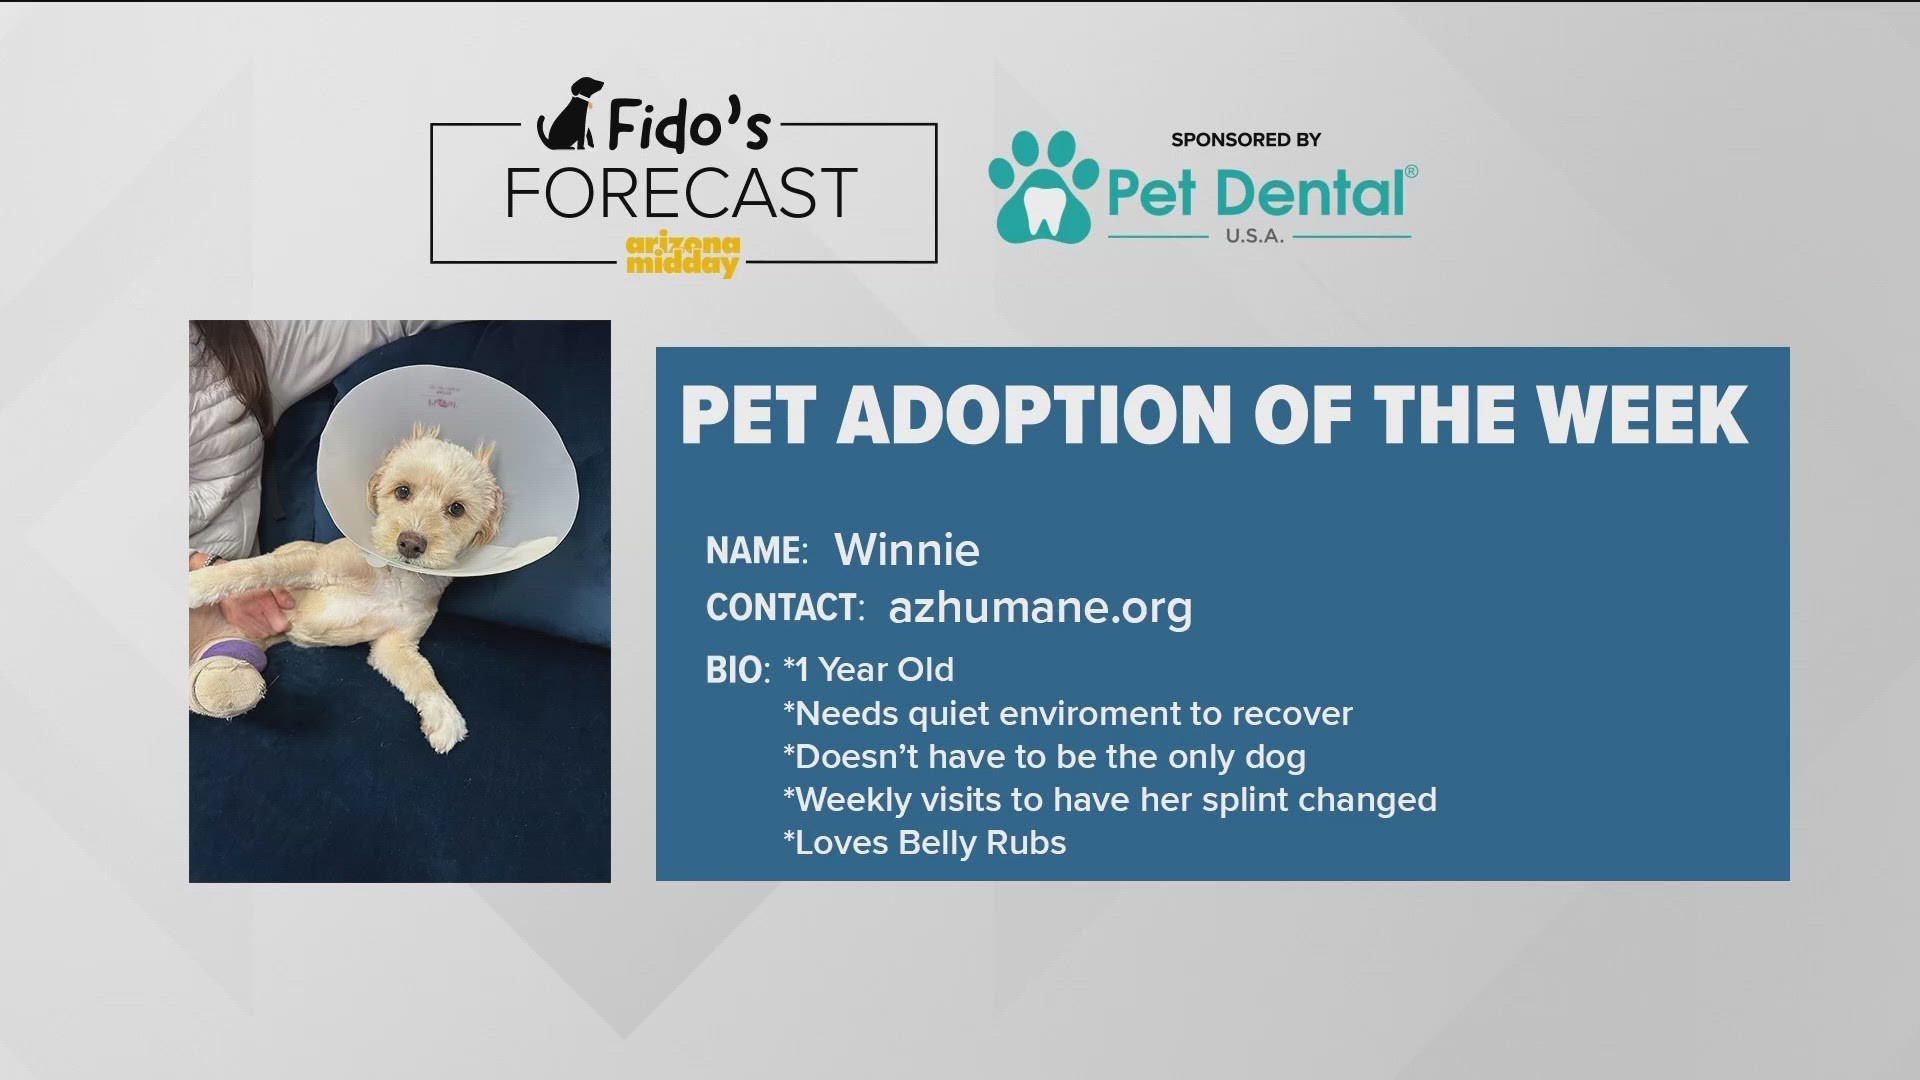 Arizona Humane Society brought Winnie to find his furever home and to help Krystle with this weekend's Fido's Forecast.